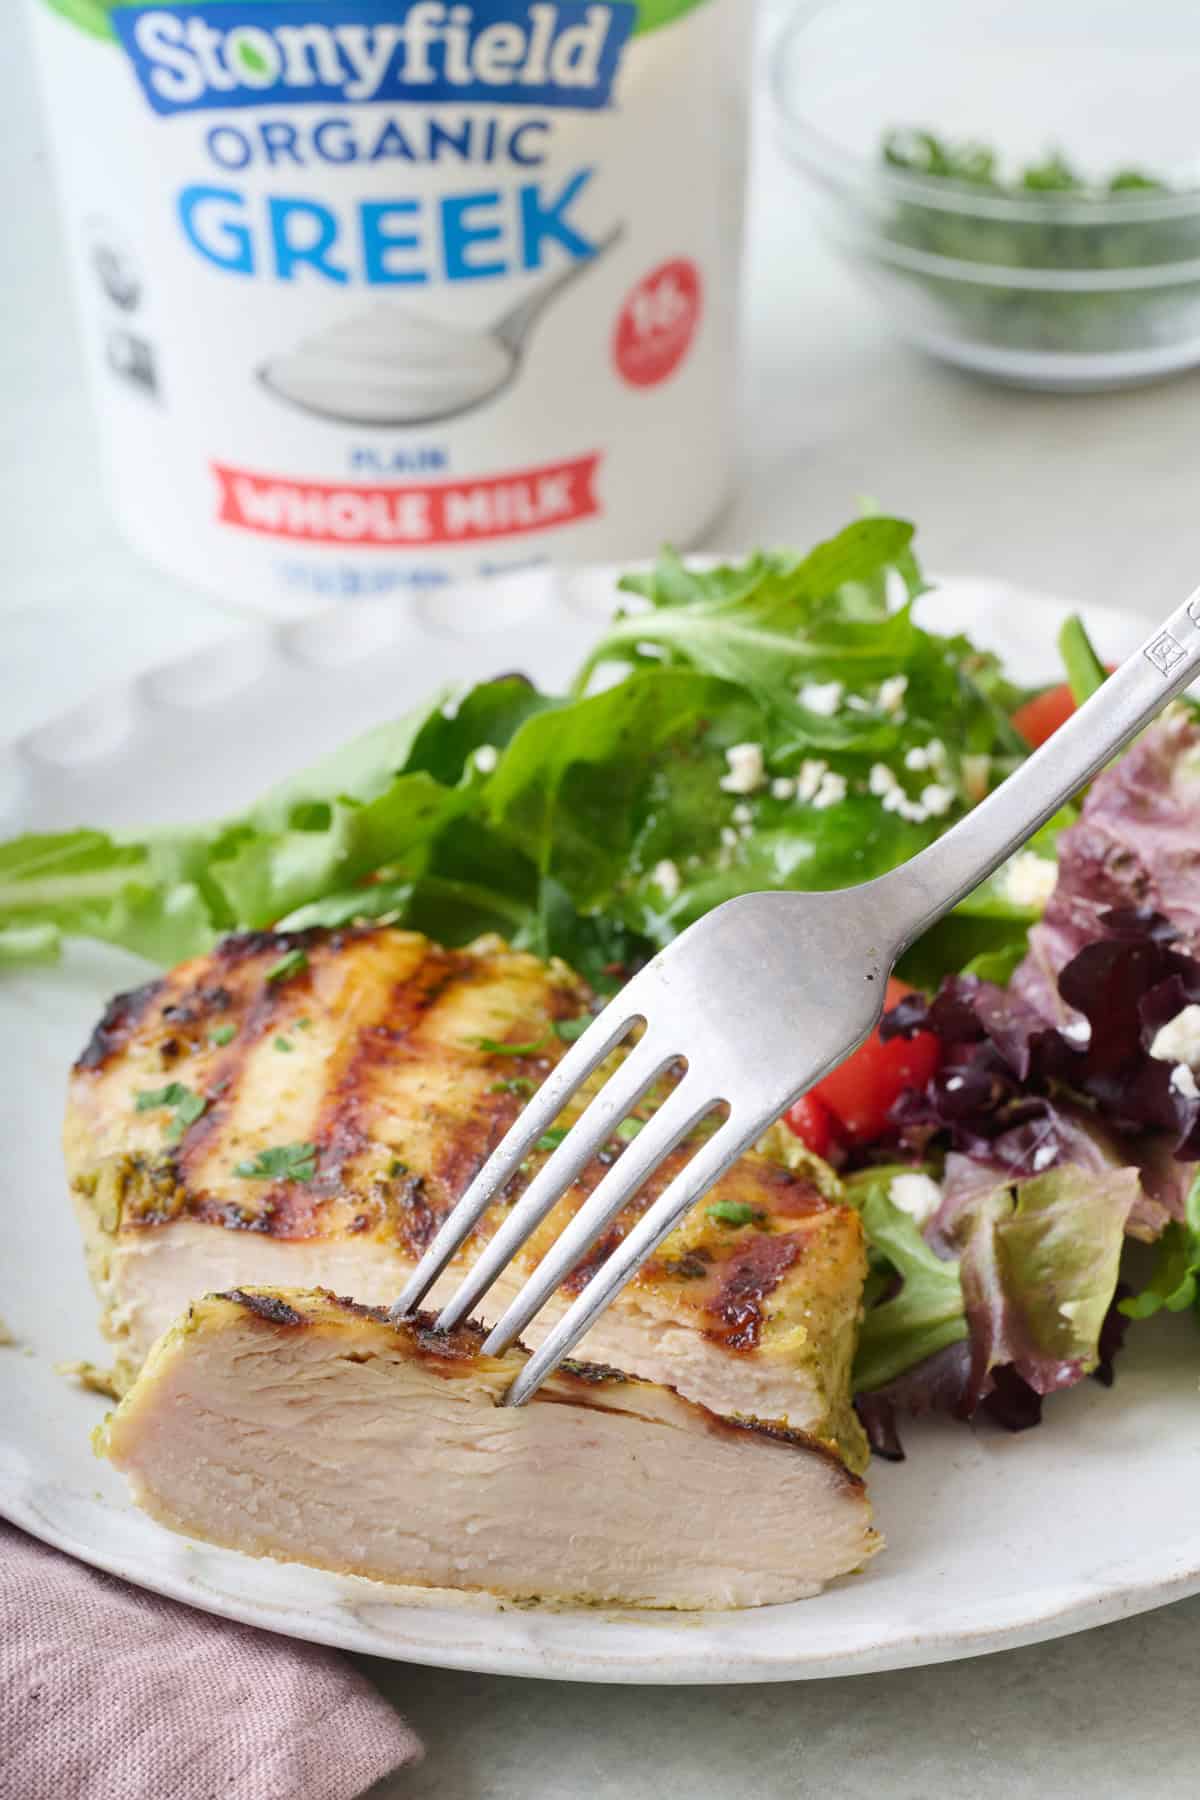 Stonyfield Organic Whole Milk Greek Yogurt and pesto marinated chicken breasts on a plate with a fork lifting up a cut piece.